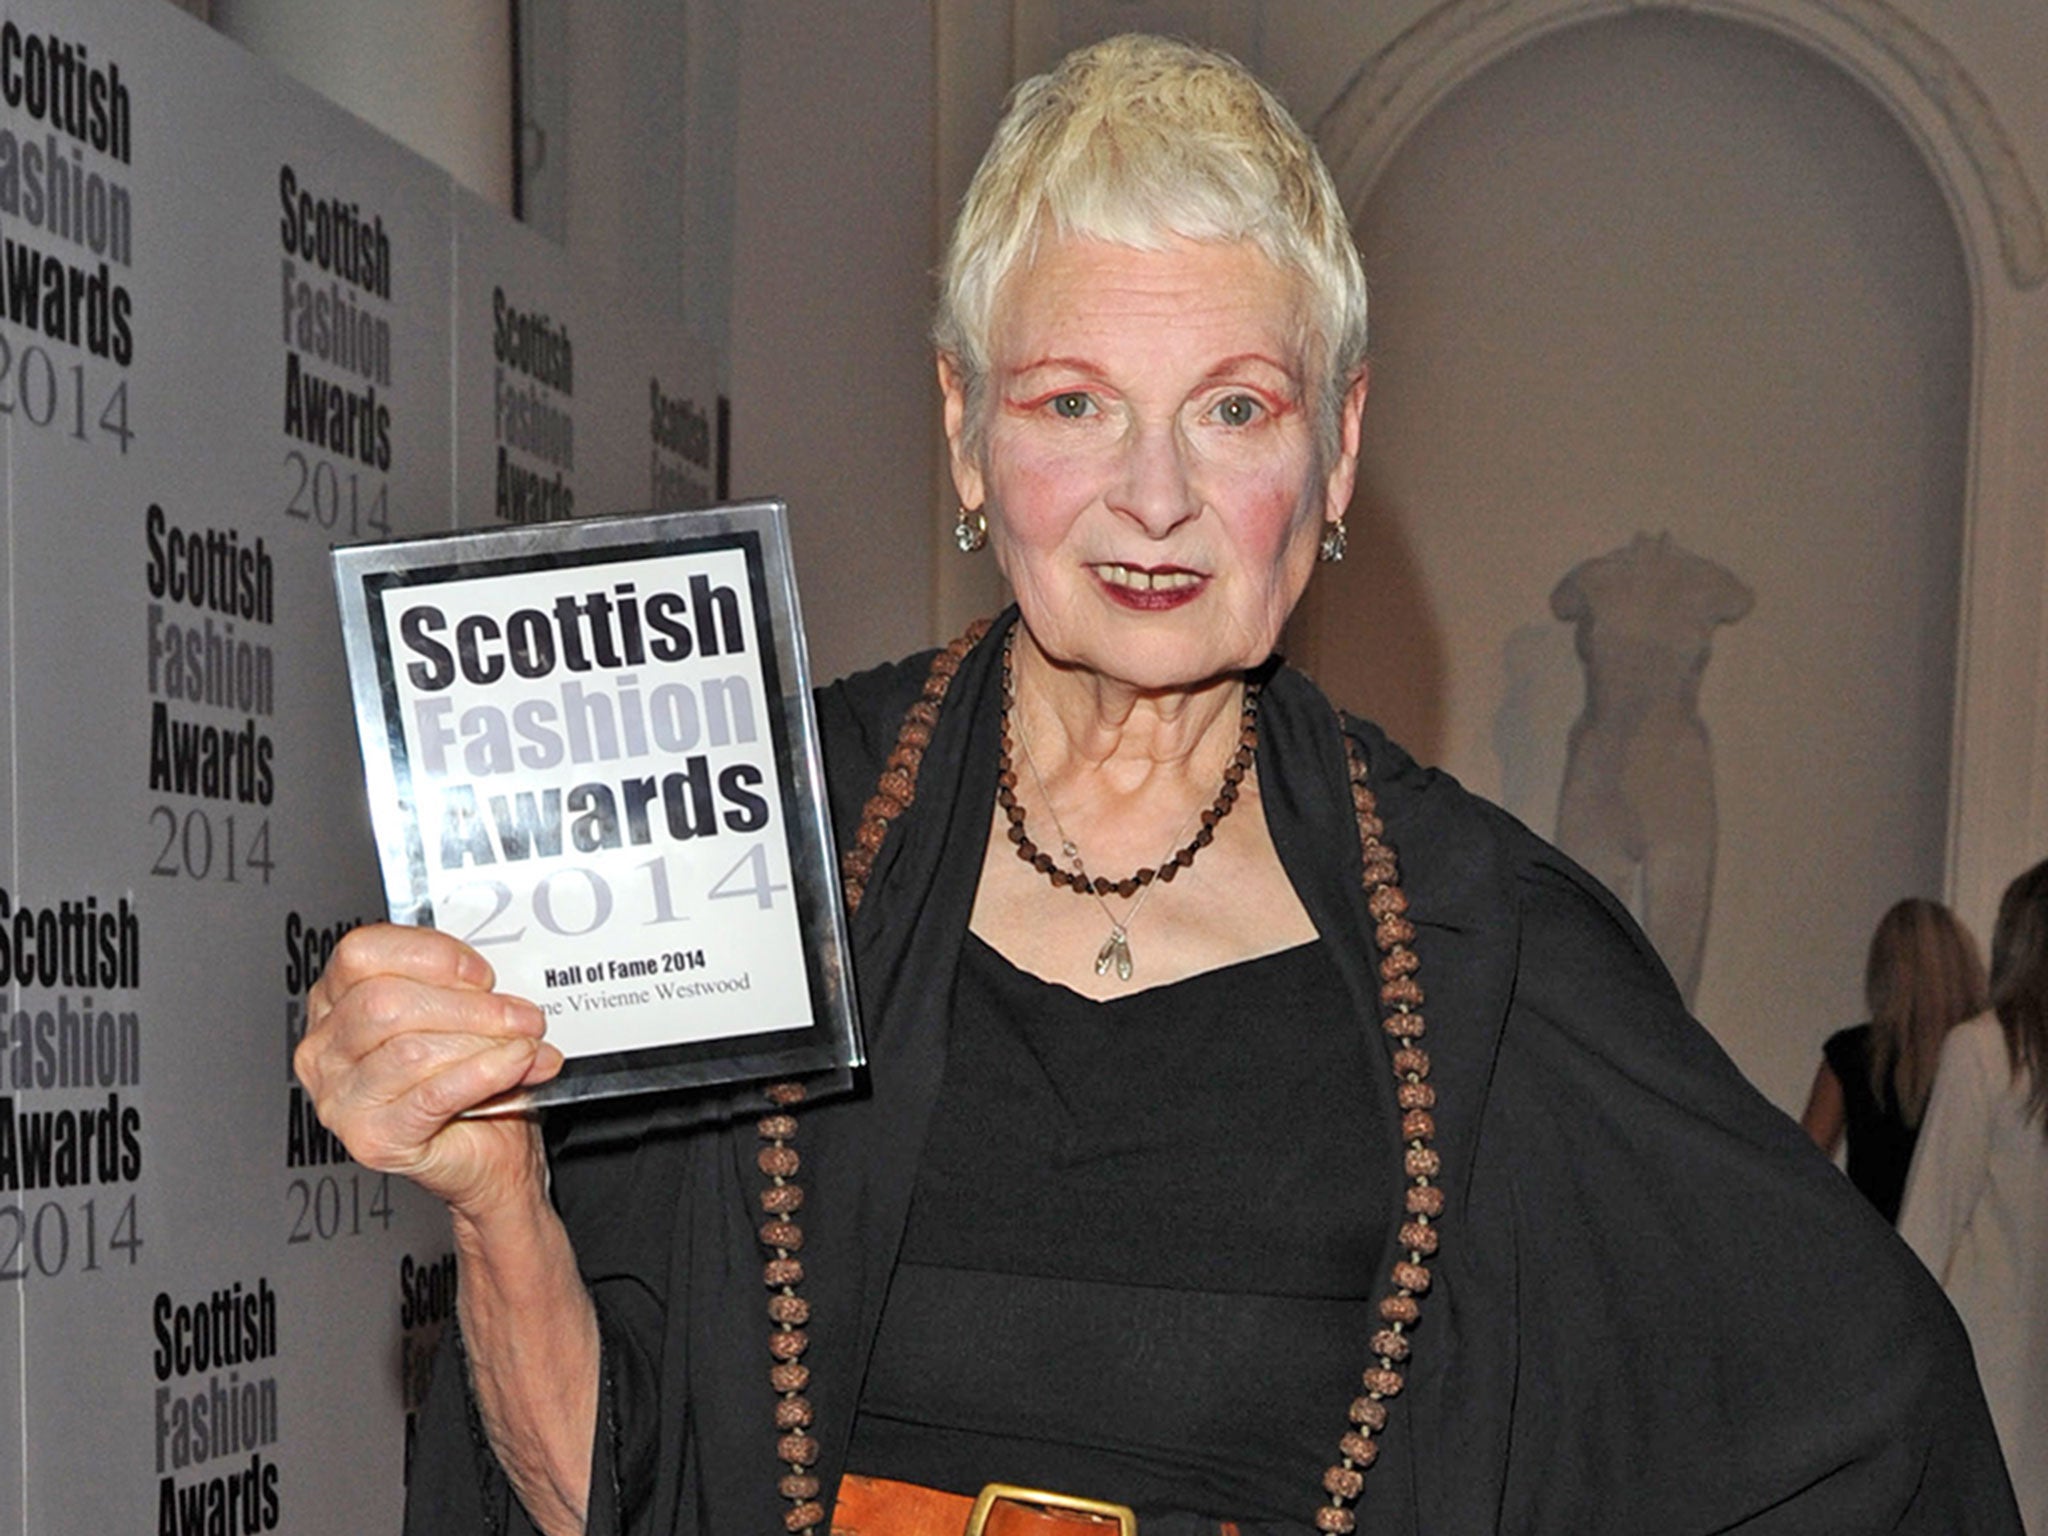 Vivienne Westwood joins the Hall of Fame at the Scottish Fashion Awards